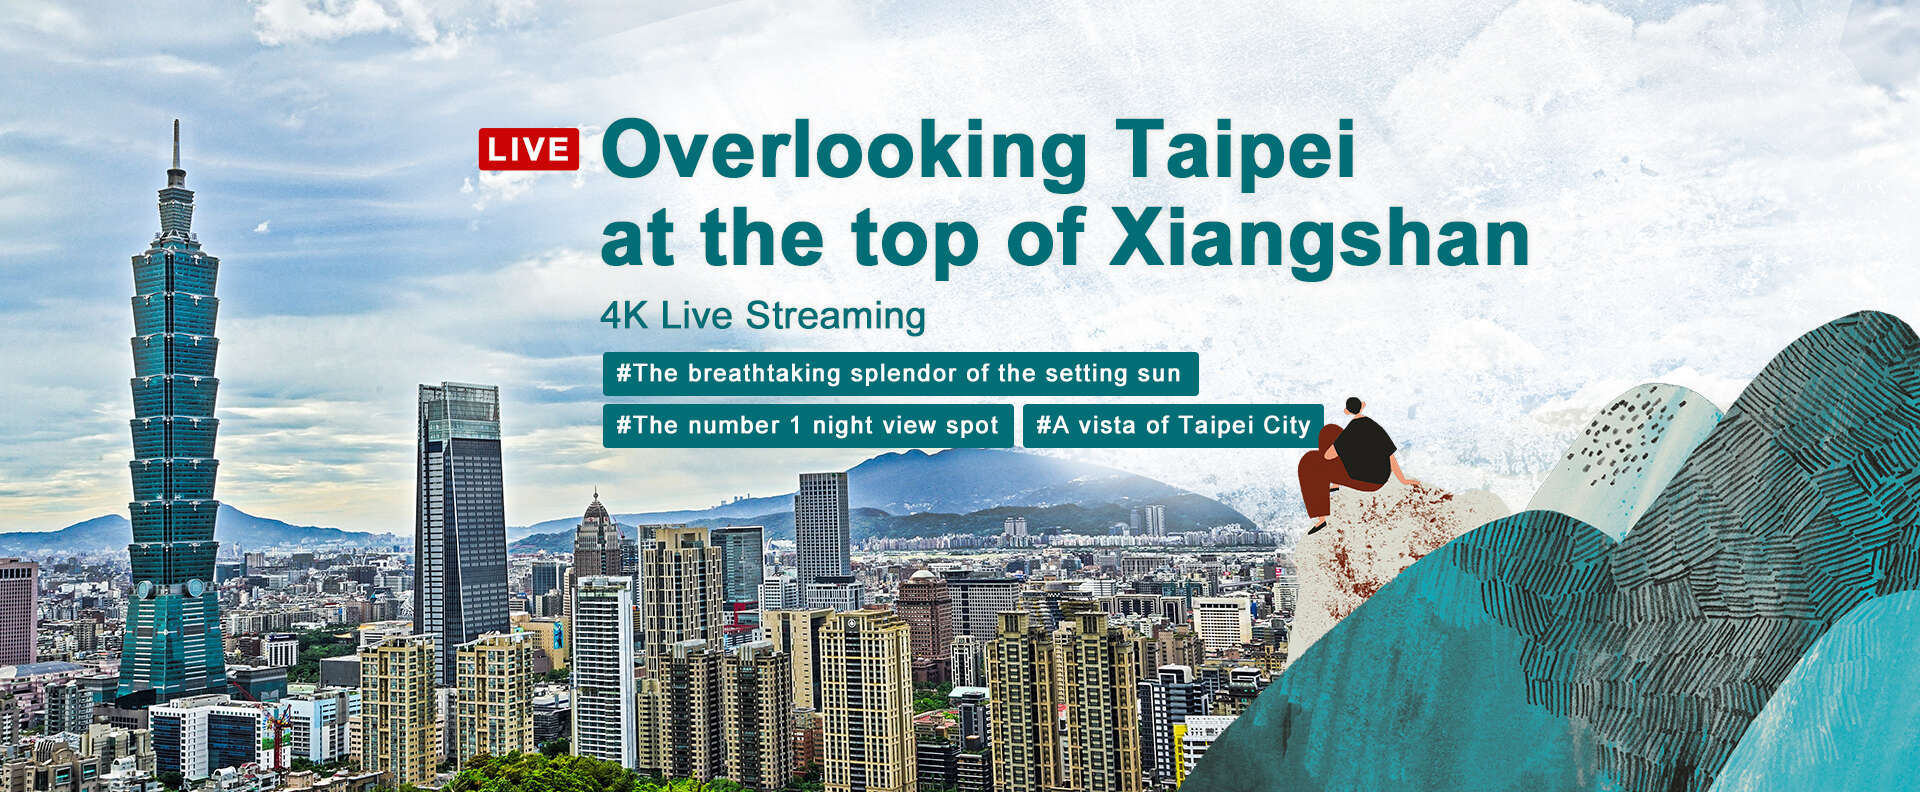 Overlooking Taipei at the top of Xiangshan - 4K Live Streaming